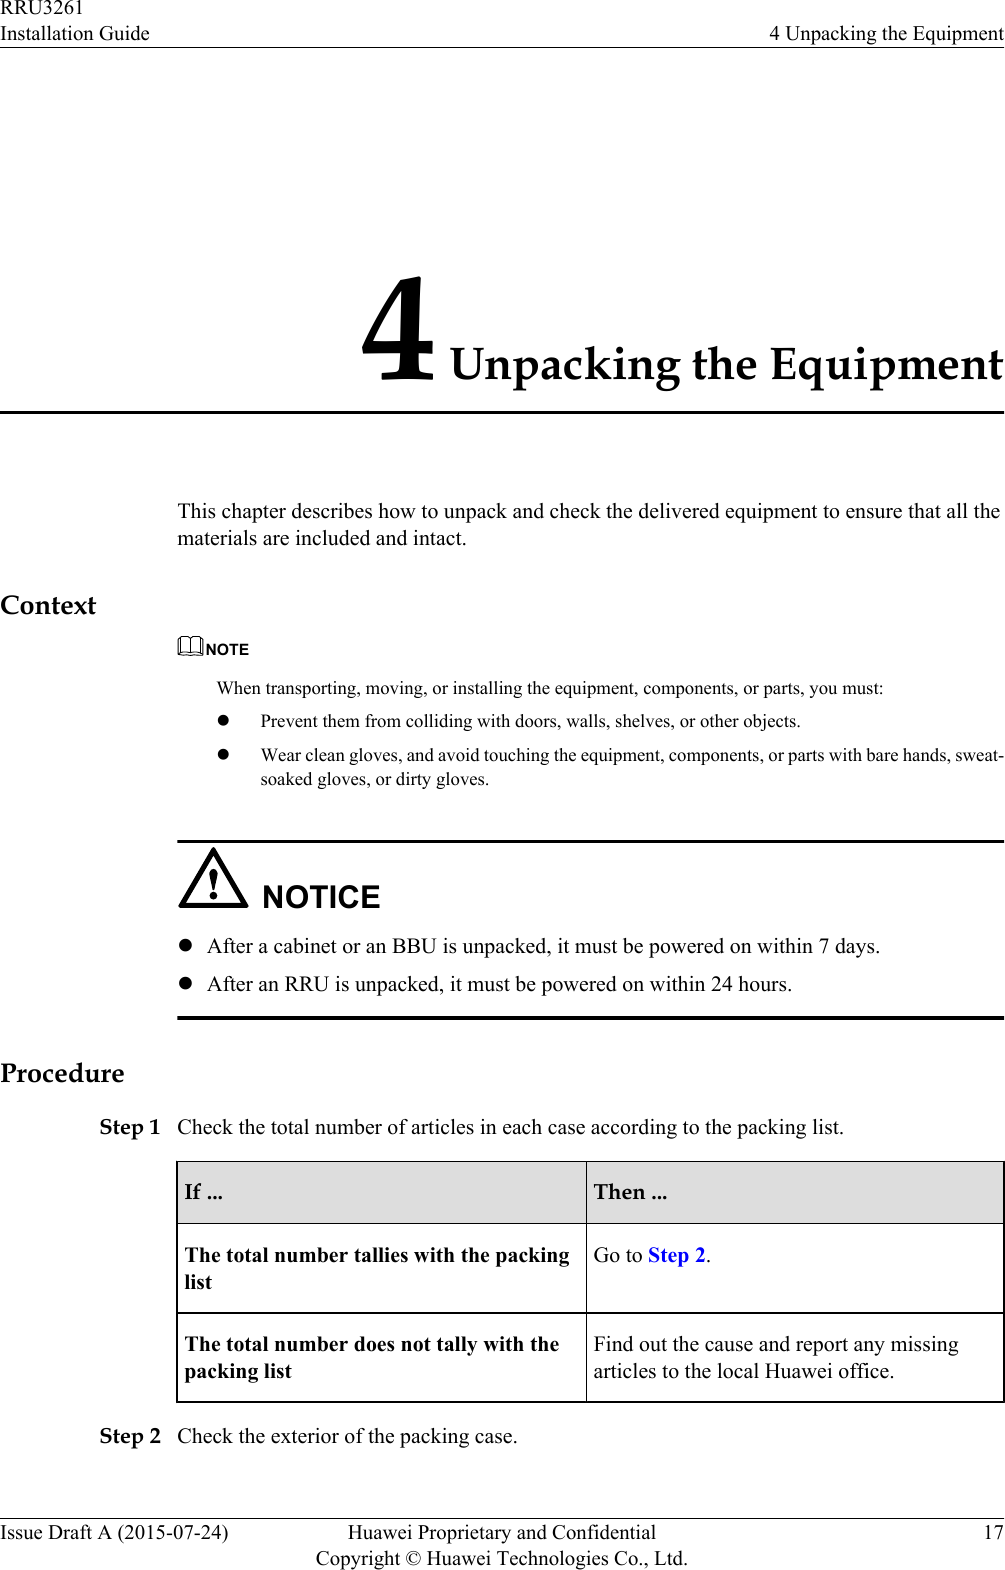 4 Unpacking the EquipmentThis chapter describes how to unpack and check the delivered equipment to ensure that all thematerials are included and intact.ContextNOTEWhen transporting, moving, or installing the equipment, components, or parts, you must:lPrevent them from colliding with doors, walls, shelves, or other objects.lWear clean gloves, and avoid touching the equipment, components, or parts with bare hands, sweat-soaked gloves, or dirty gloves.NOTICElAfter a cabinet or an BBU is unpacked, it must be powered on within 7 days.lAfter an RRU is unpacked, it must be powered on within 24 hours.ProcedureStep 1 Check the total number of articles in each case according to the packing list.If ... Then ...The total number tallies with the packinglistGo to Step 2.The total number does not tally with thepacking listFind out the cause and report any missingarticles to the local Huawei office.Step 2 Check the exterior of the packing case.RRU3261Installation Guide 4 Unpacking the EquipmentIssue Draft A (2015-07-24) Huawei Proprietary and ConfidentialCopyright © Huawei Technologies Co., Ltd.17